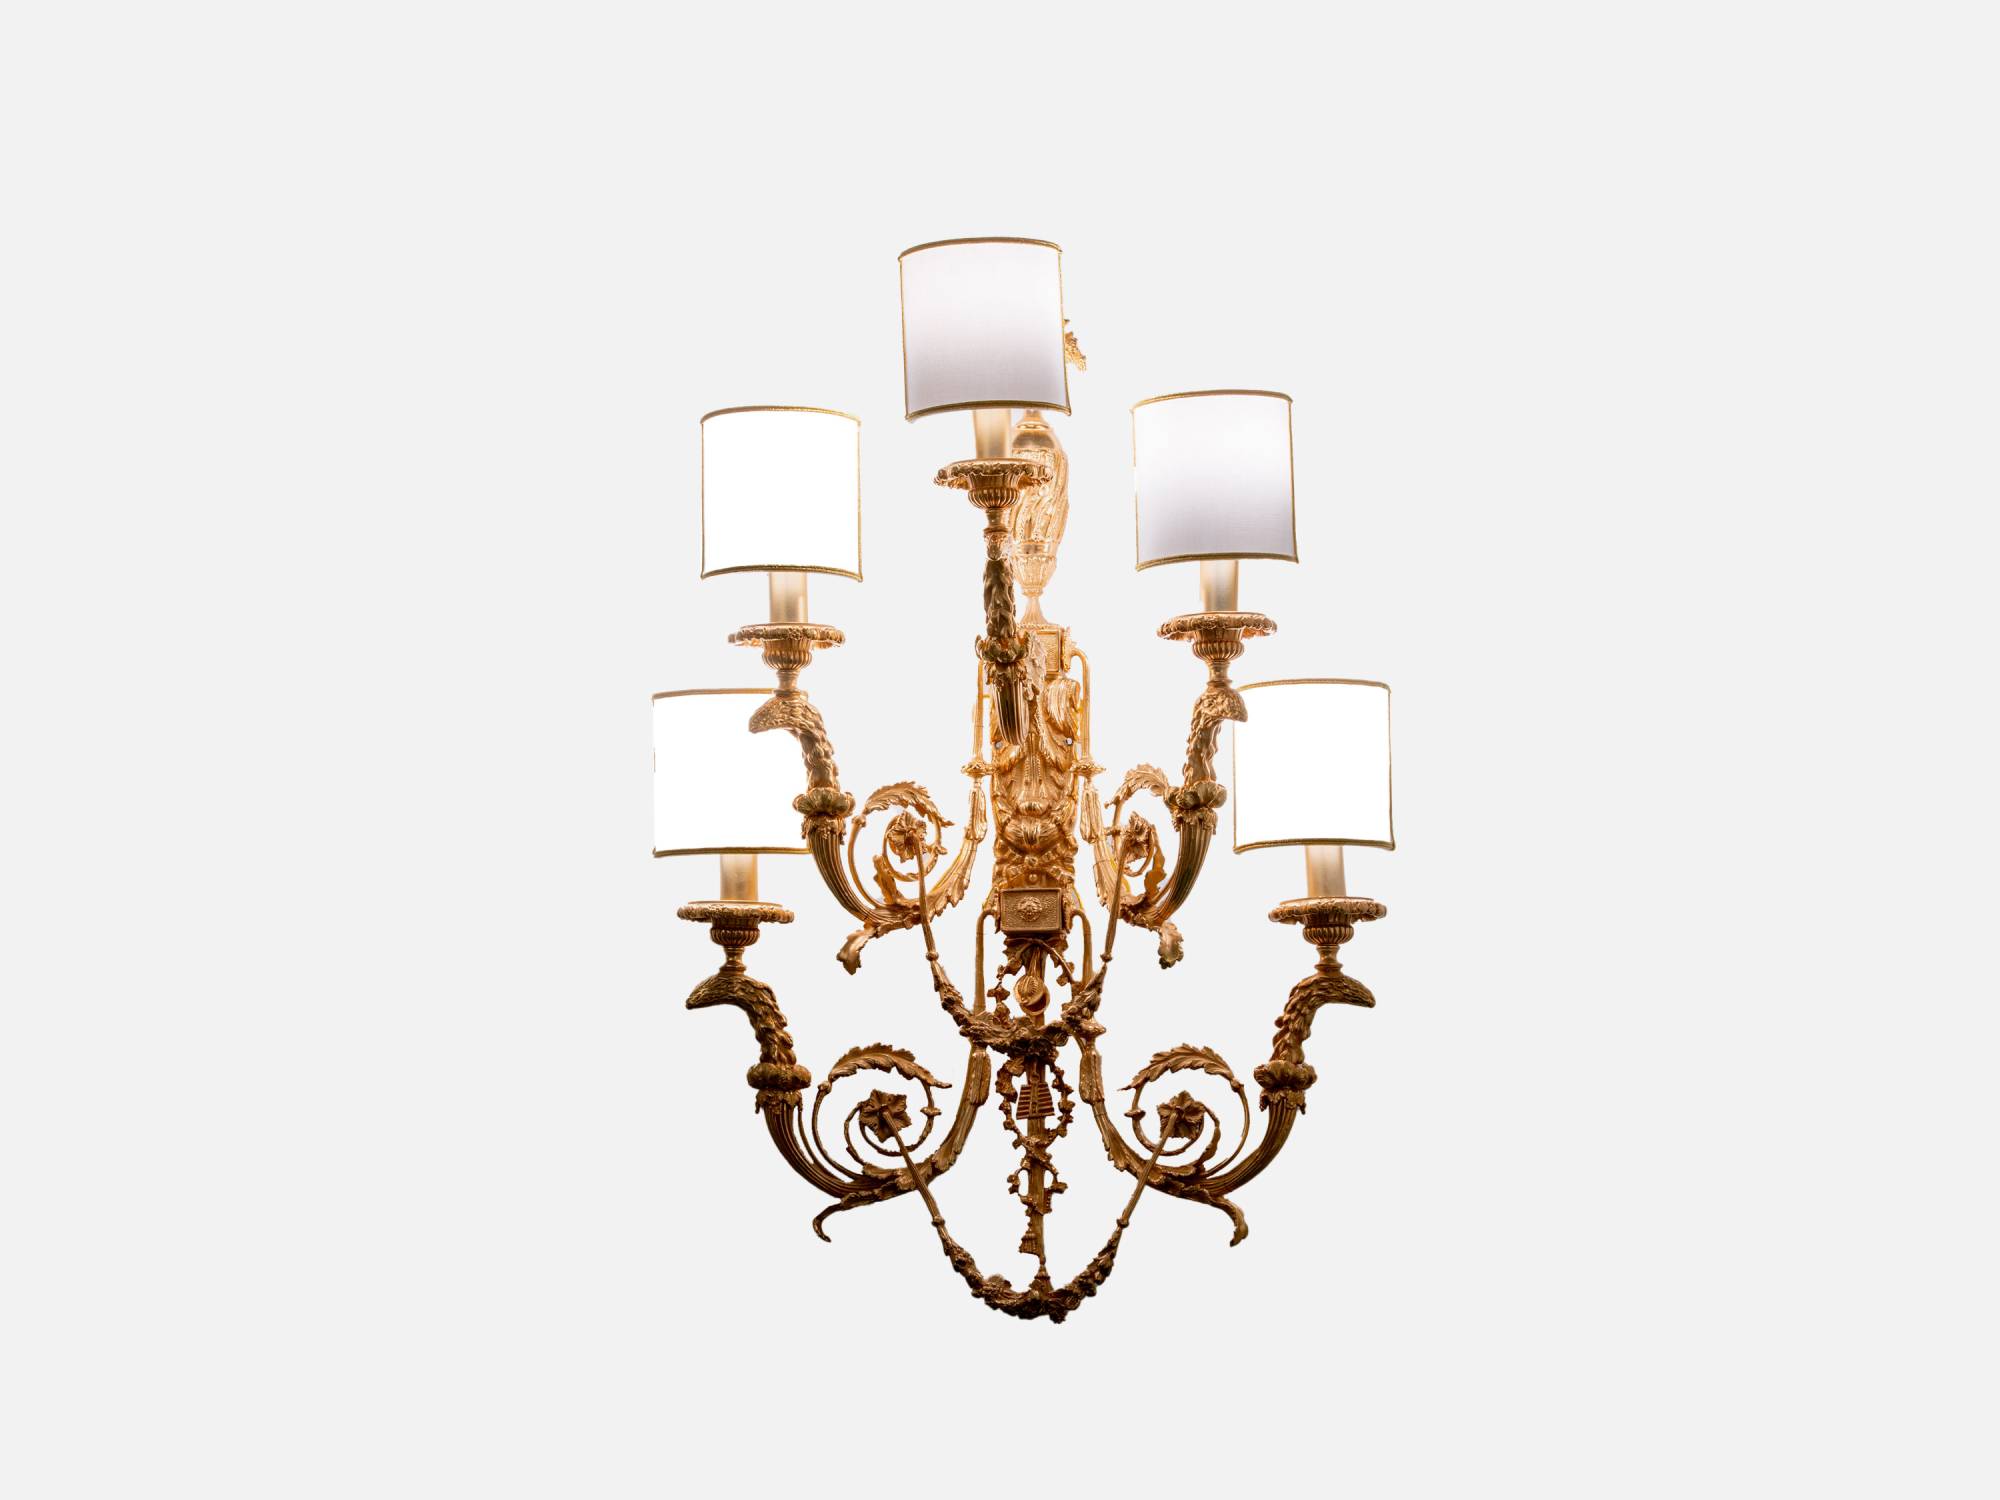 ART. 2306 – The elegance of luxury classic Lighting made in Italy by C.G. Capelletti.